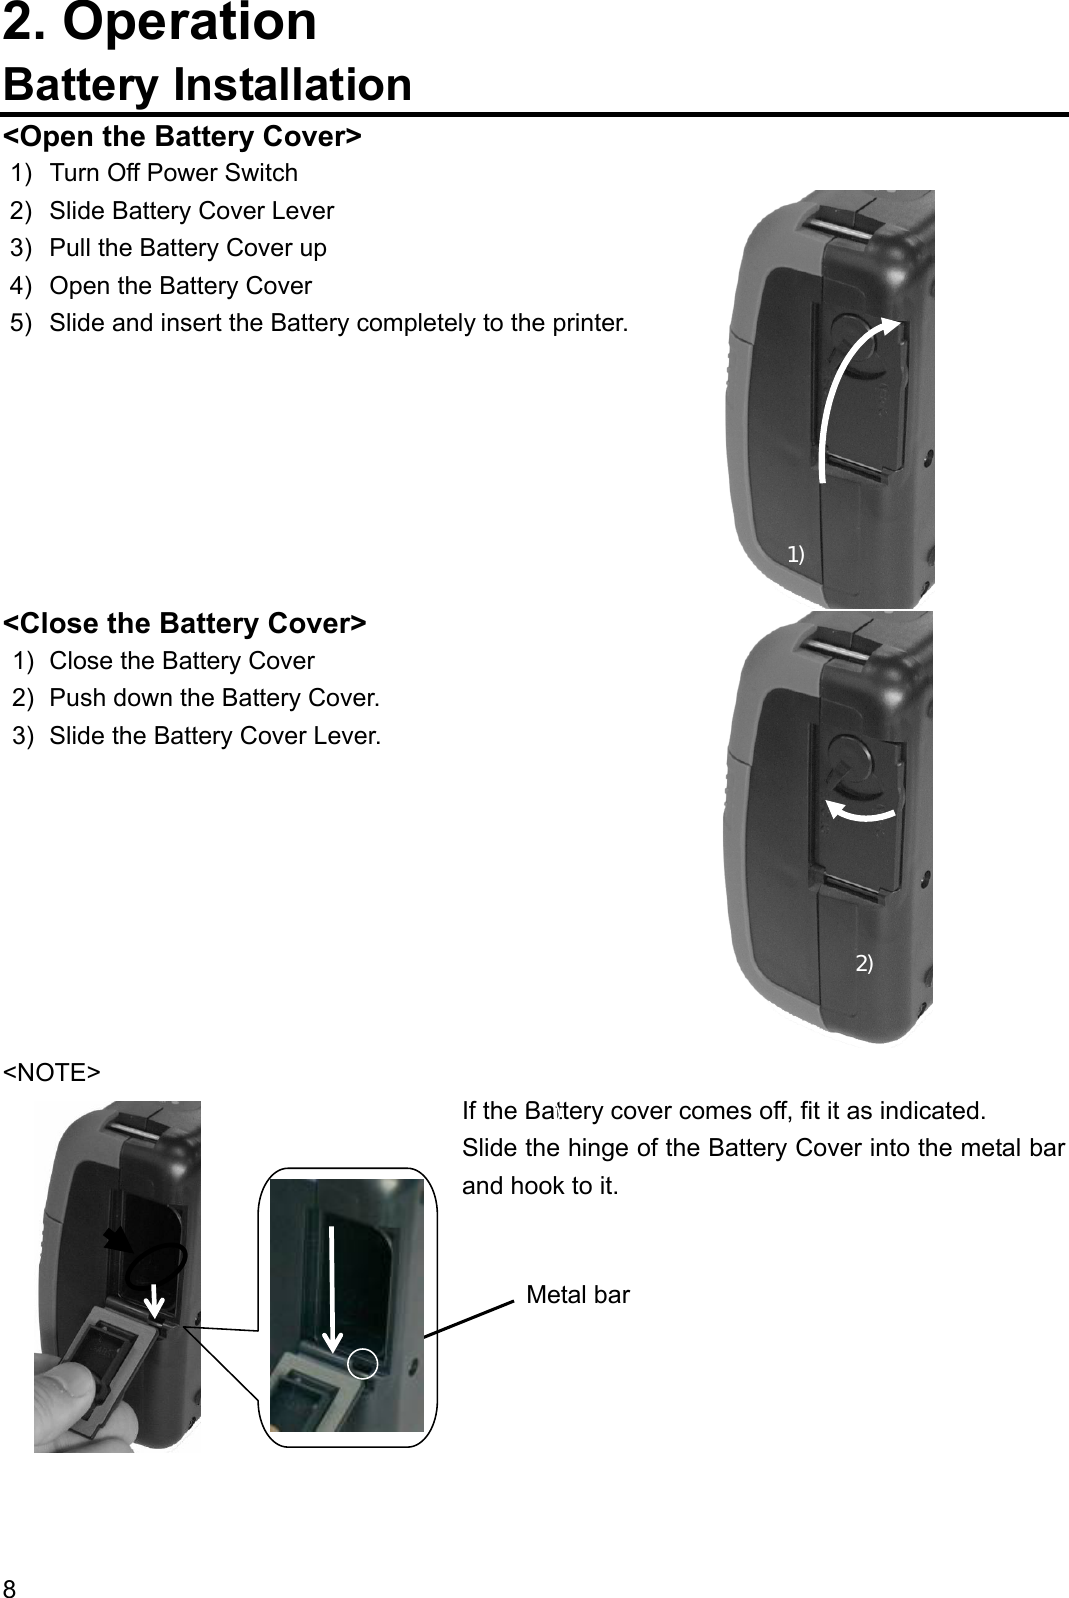 2. Operation Battery Installation &lt;Open the Battery Cover&gt; 1)  Turn Off Power Switch  2)  1) 2)  Slide Battery Cover Lever 3)  Pull the Battery Cover up 4)  Open the Battery Cover 5)  Slide and insert the Battery completely to the printer.                      &lt;Close the Battery Cover&gt; 1)  Close the Battery Cover 2)  Push down the Battery Cover. 3)  Slide the Battery Cover Lever.         &lt;NOTE&gt; If the Battery cover comes off, fit it as indicated. Slide the hinge of the Battery Cover into the metal bar and hook to it.         Metal bar 8  